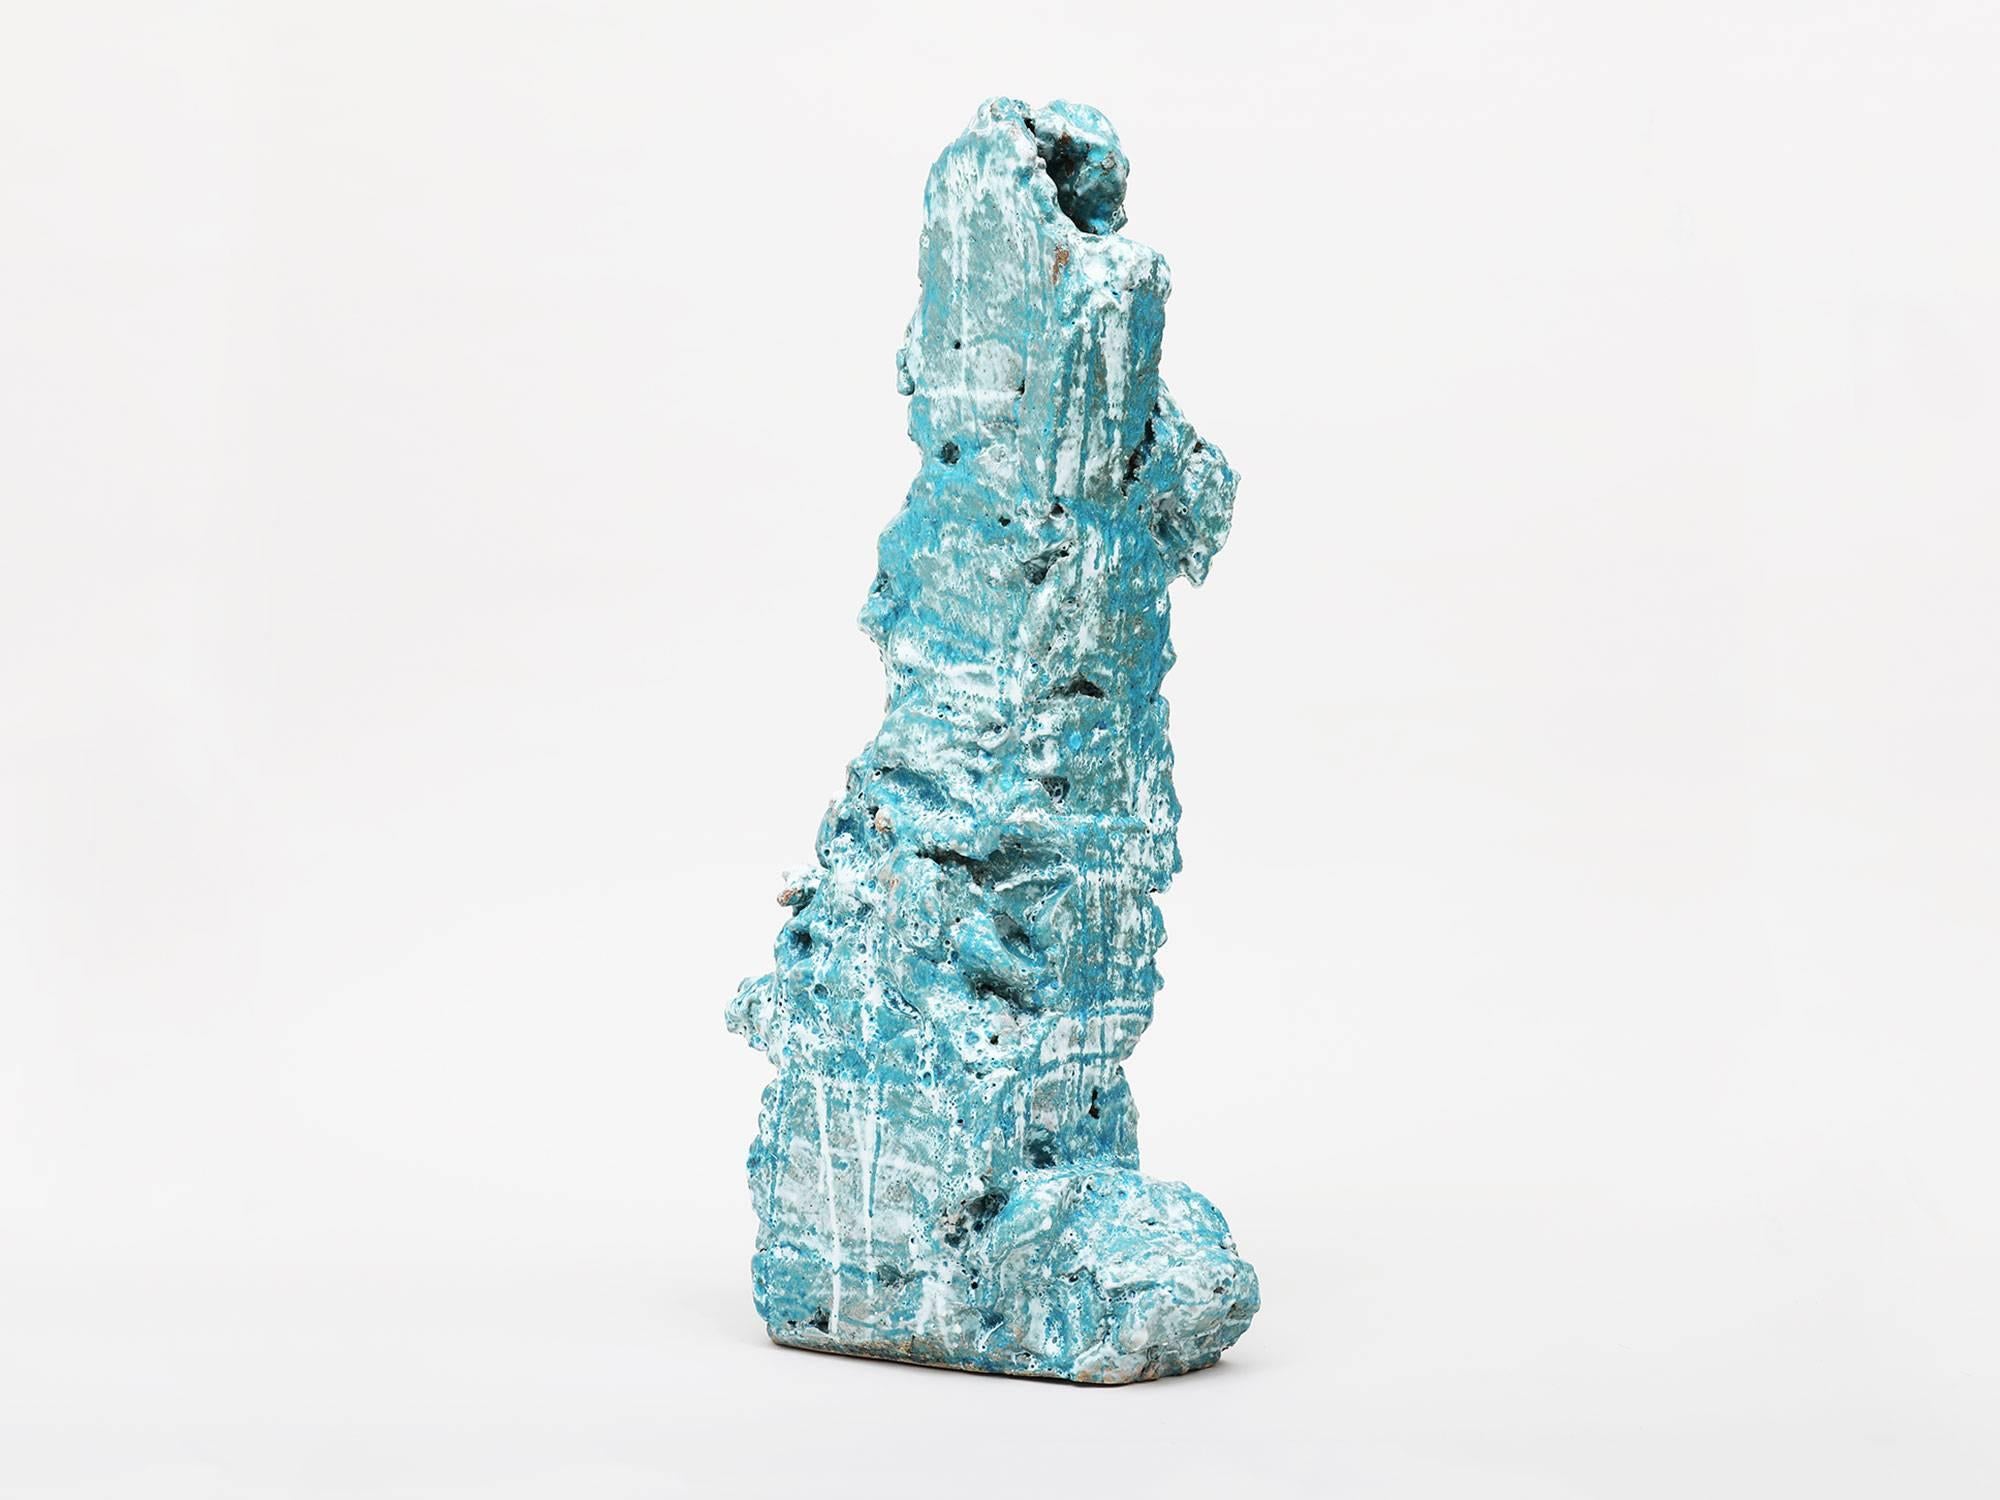 Large-scale, handmade gestural blue glazed ceramic sculpture by the Minimalist New York City painter and sculptor Guy Corriero.